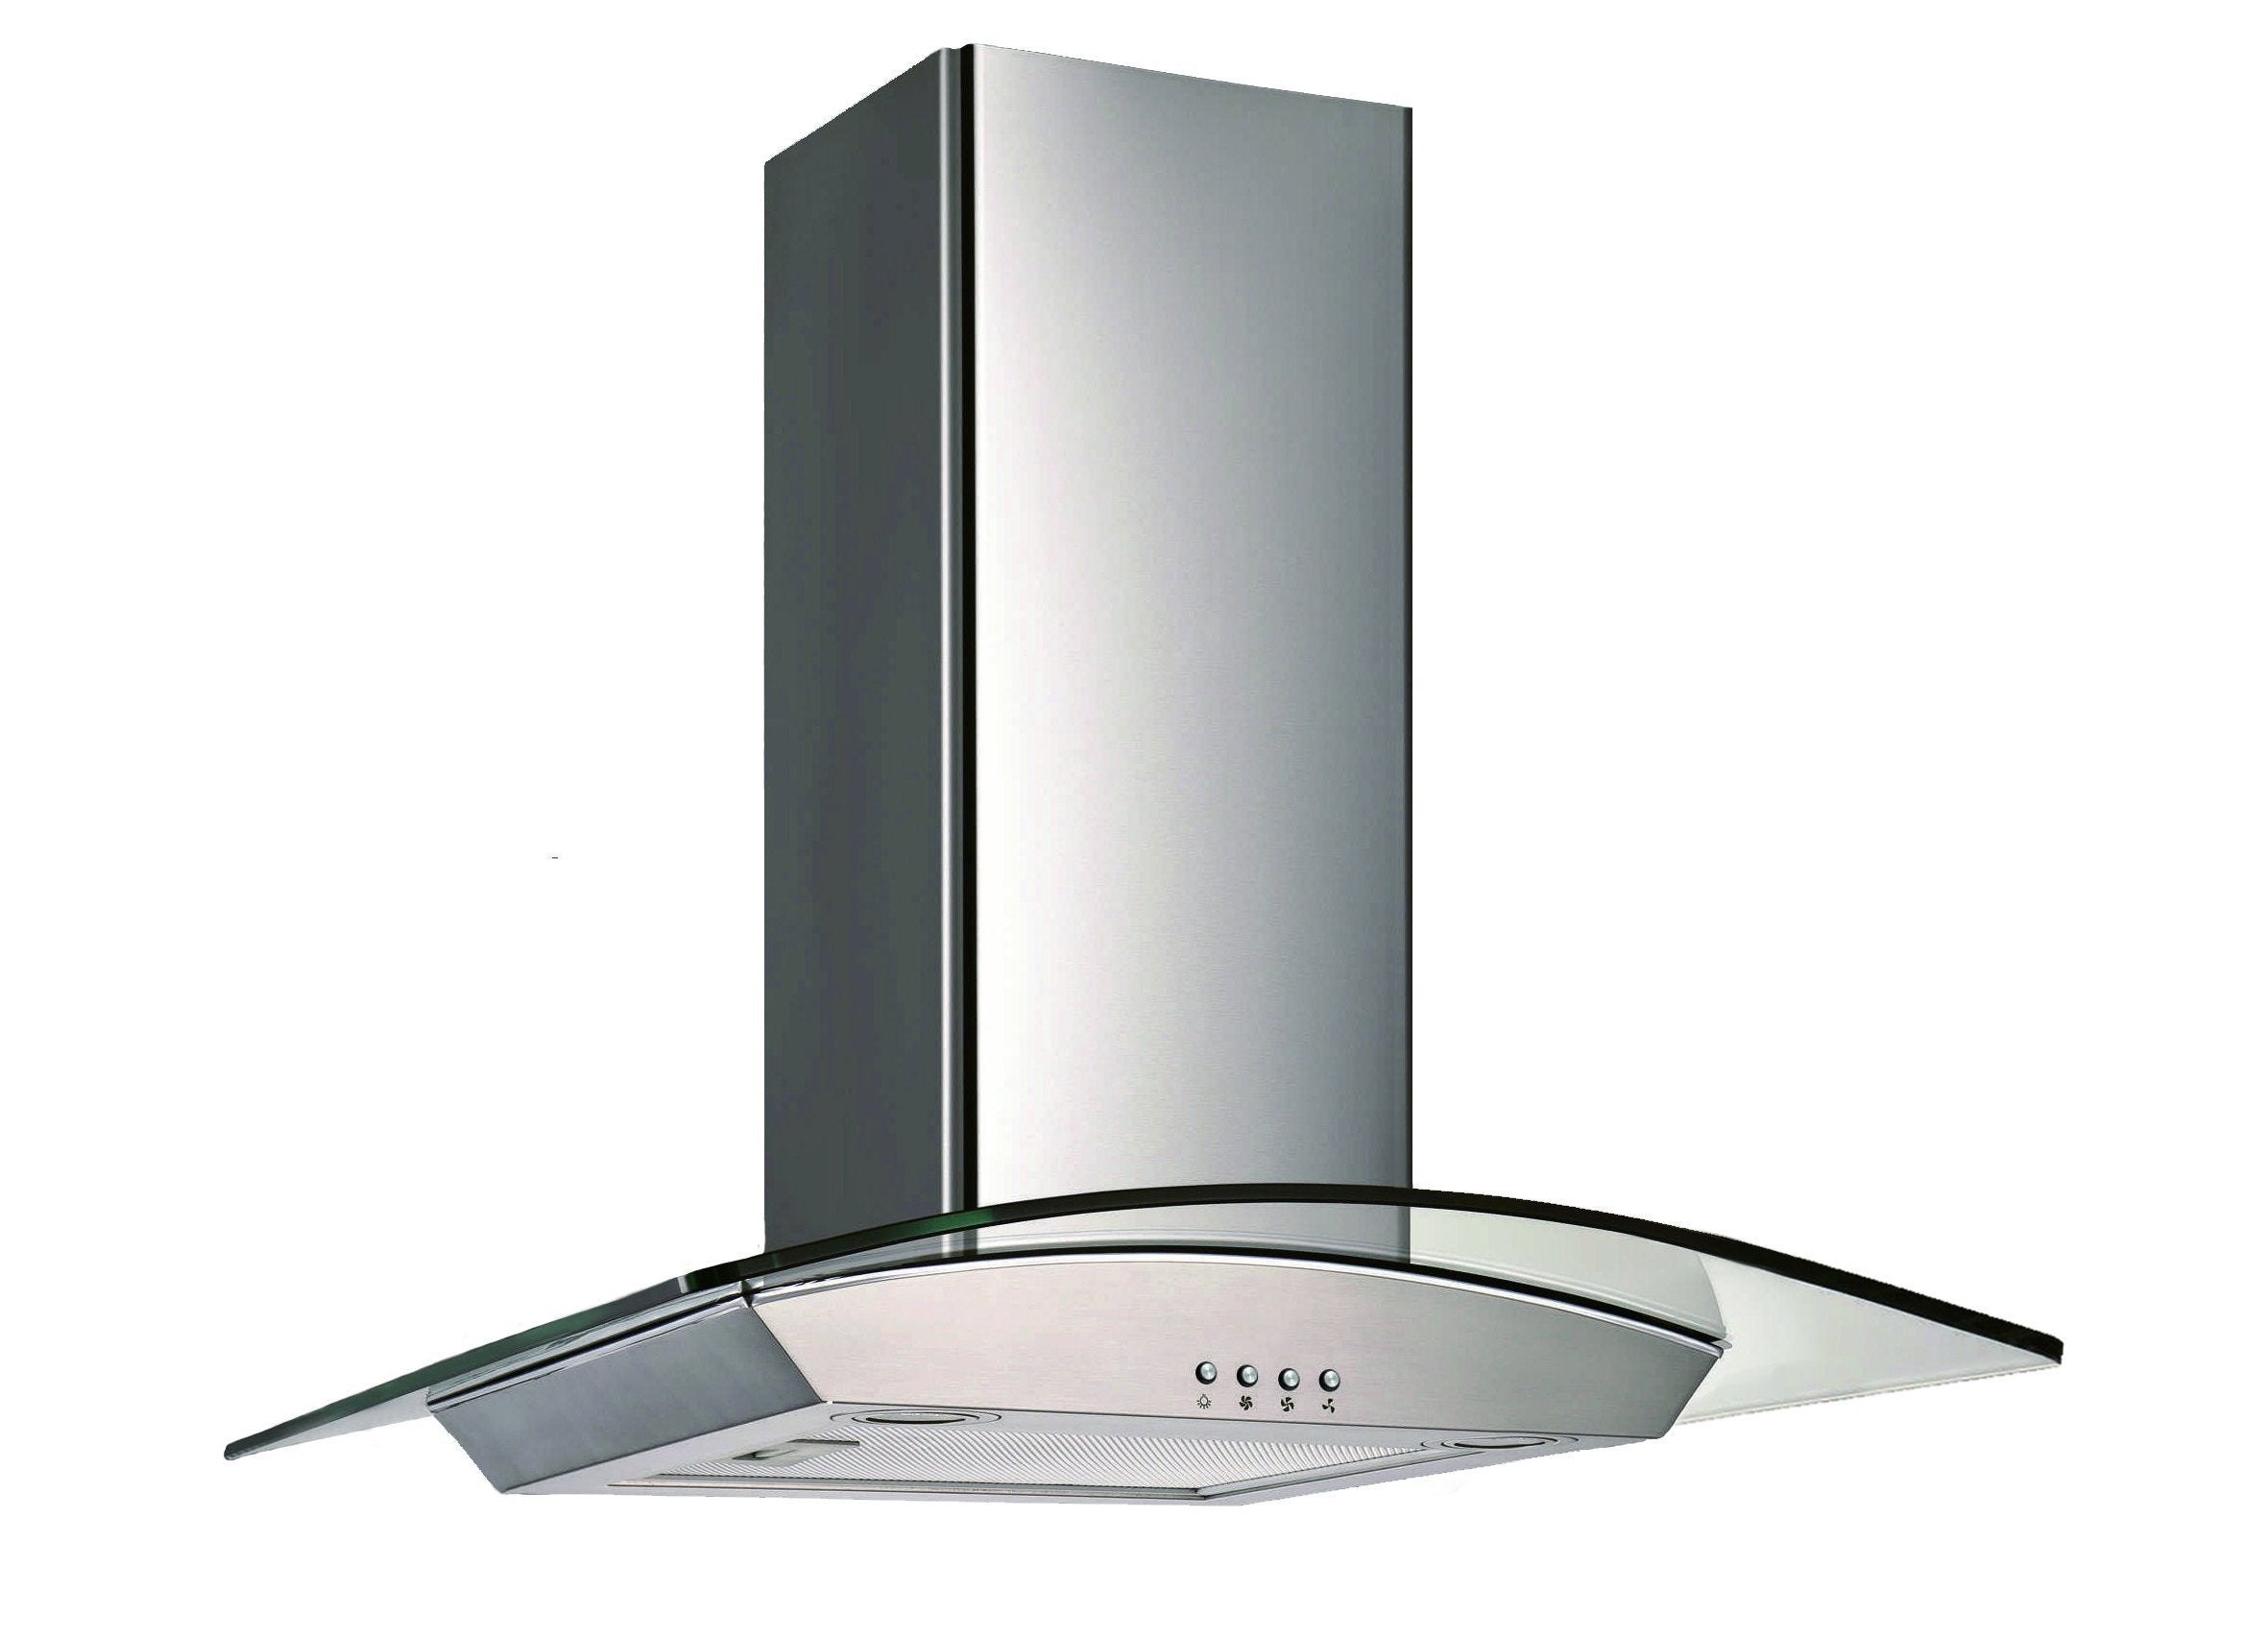 GCP430 30 in. Wall Mounted Range Hood with a Stainless Steel Body and Glass Canopy